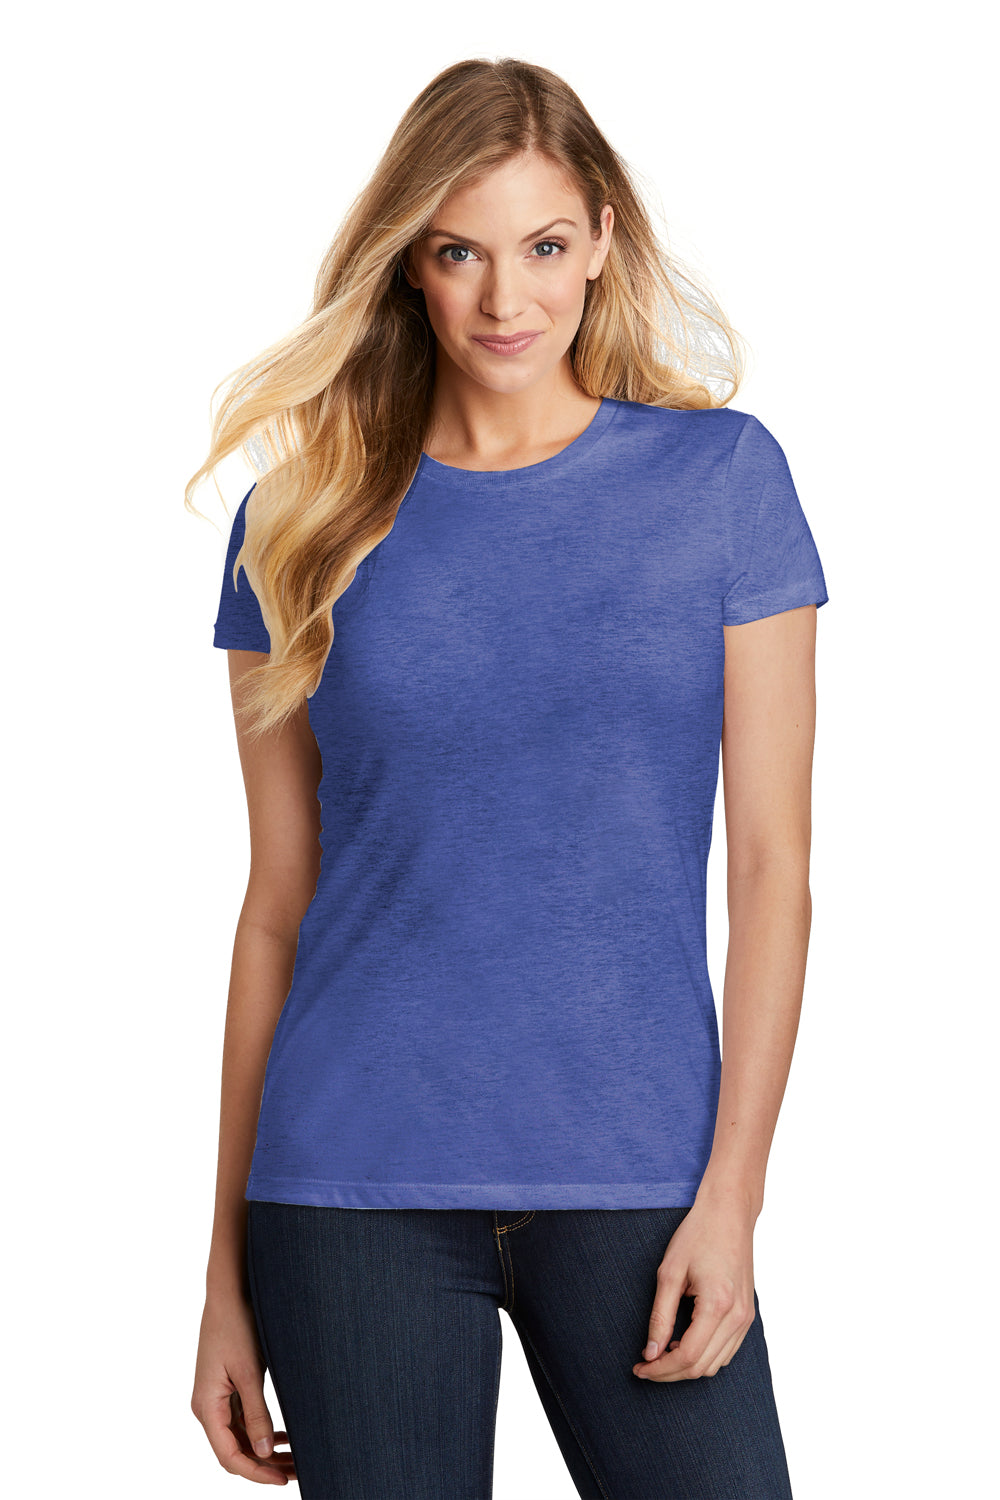 District DT155 Womens Fitted Perfect Tri Short Sleeve Crewneck T-Shirt Royal Blue Front